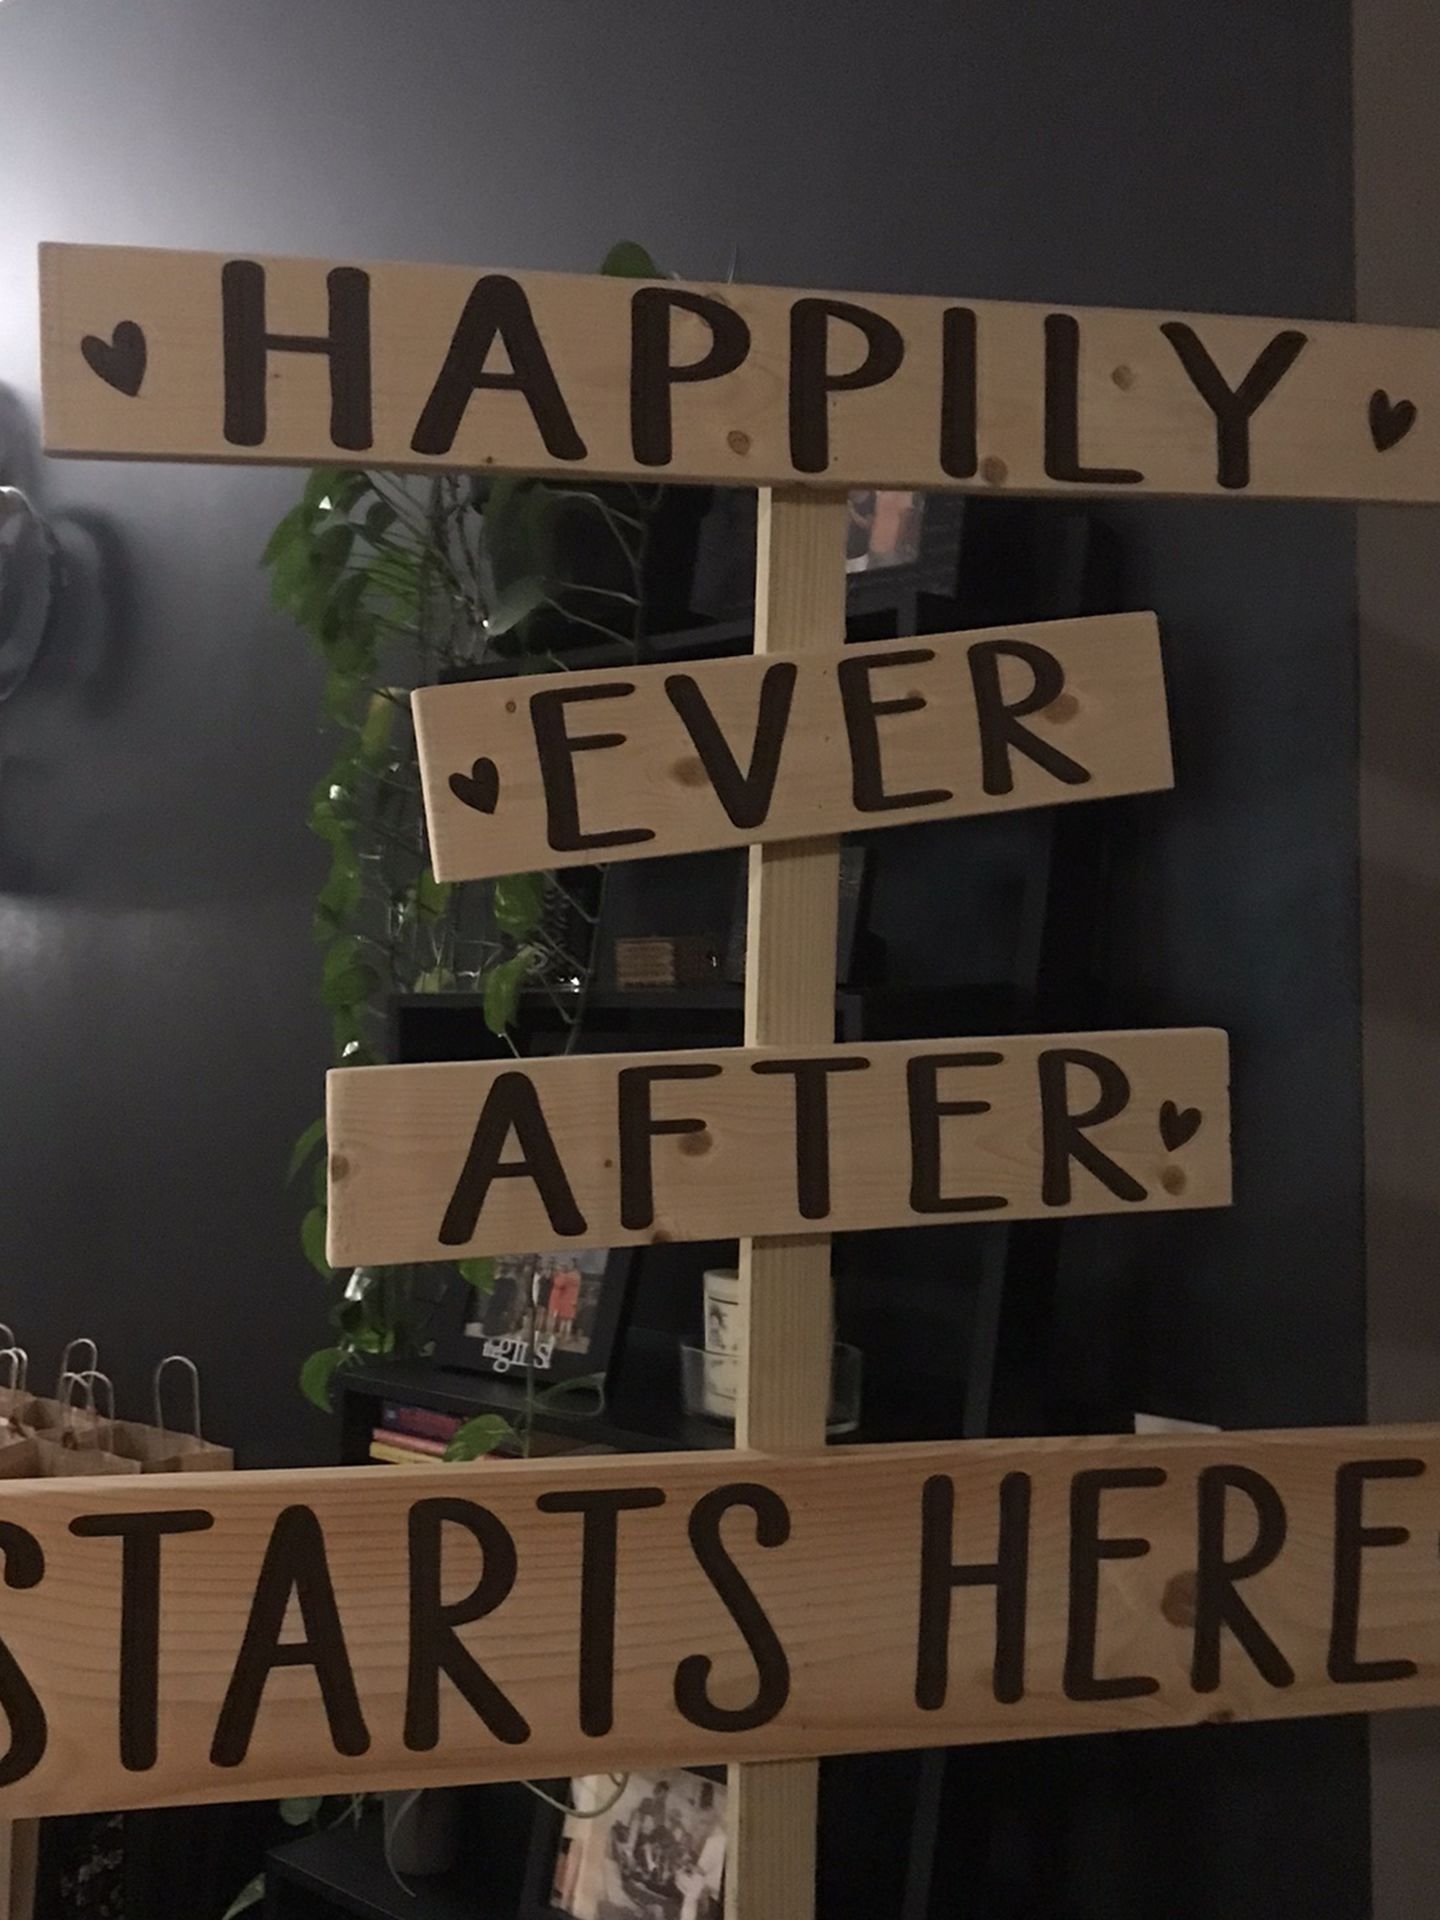 Happily ever after starts here sign